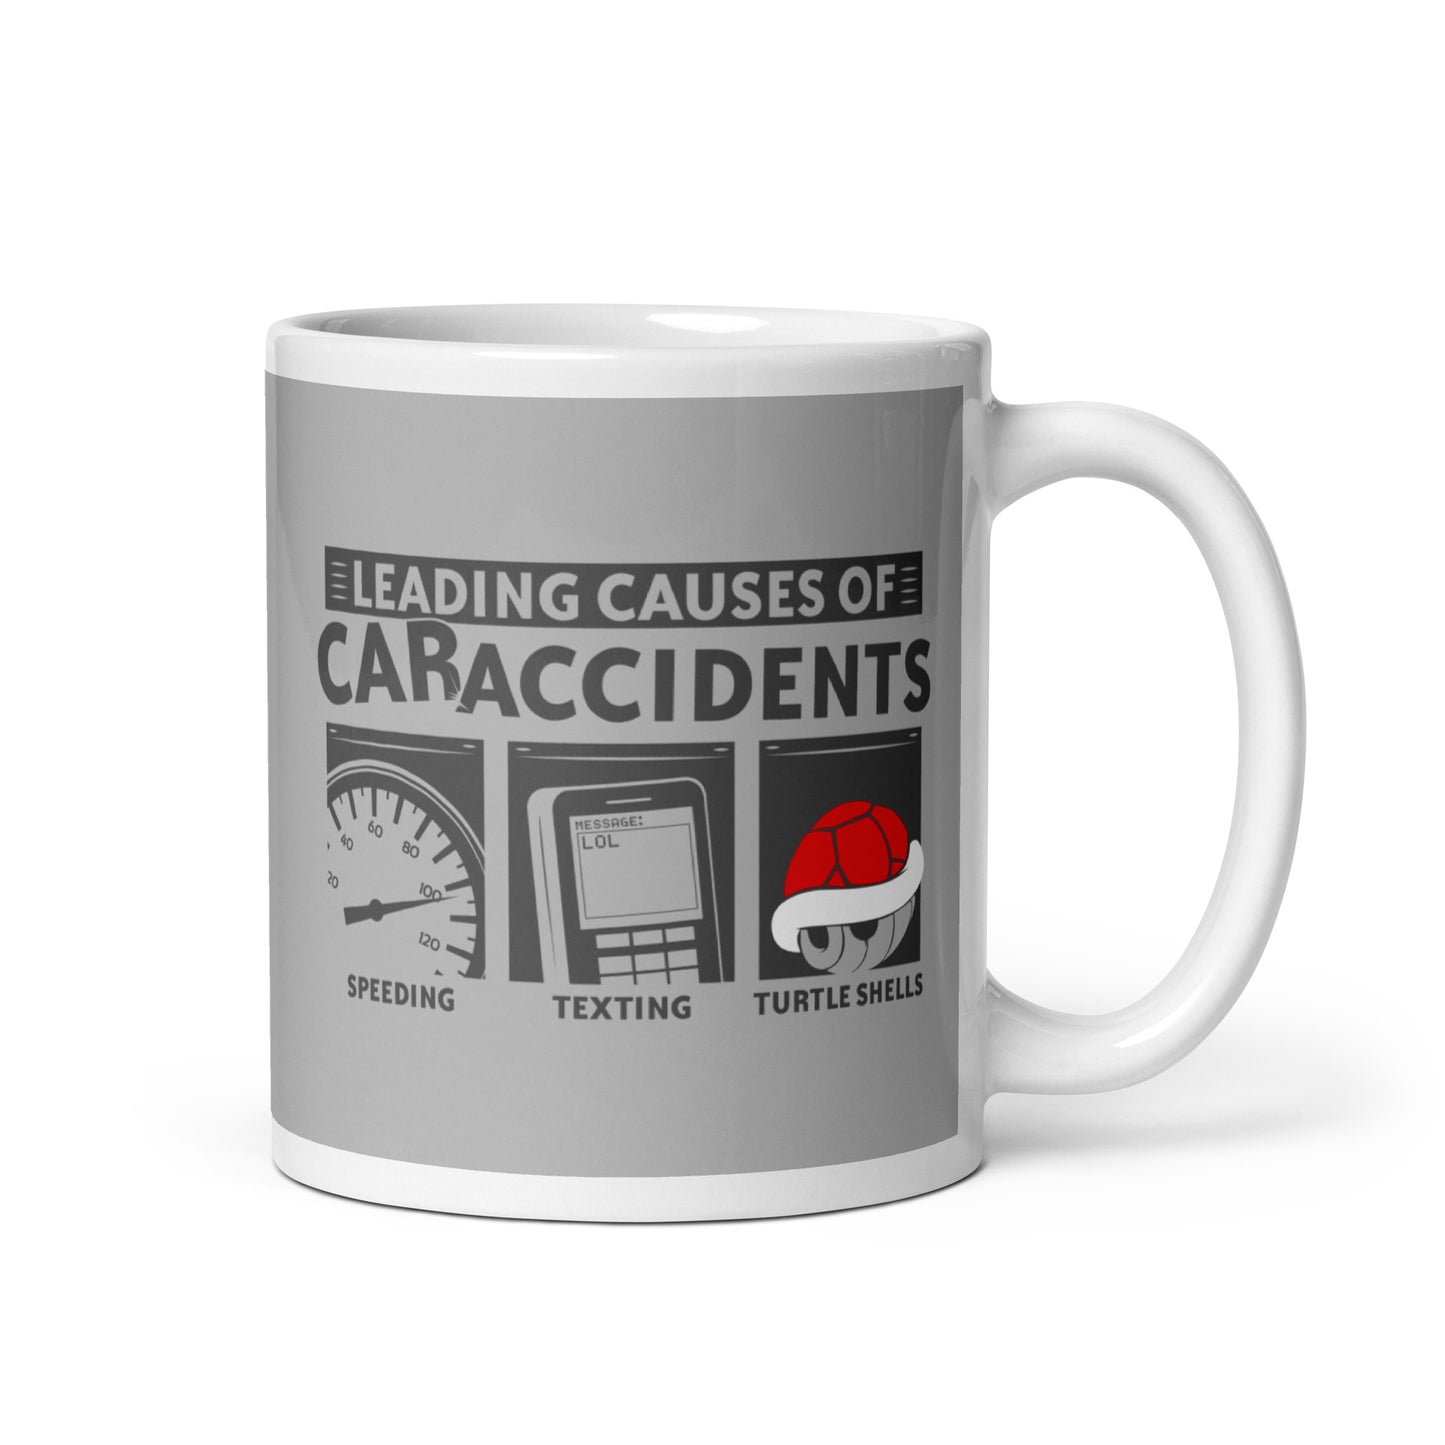 Leading Causes of Accidents Mug